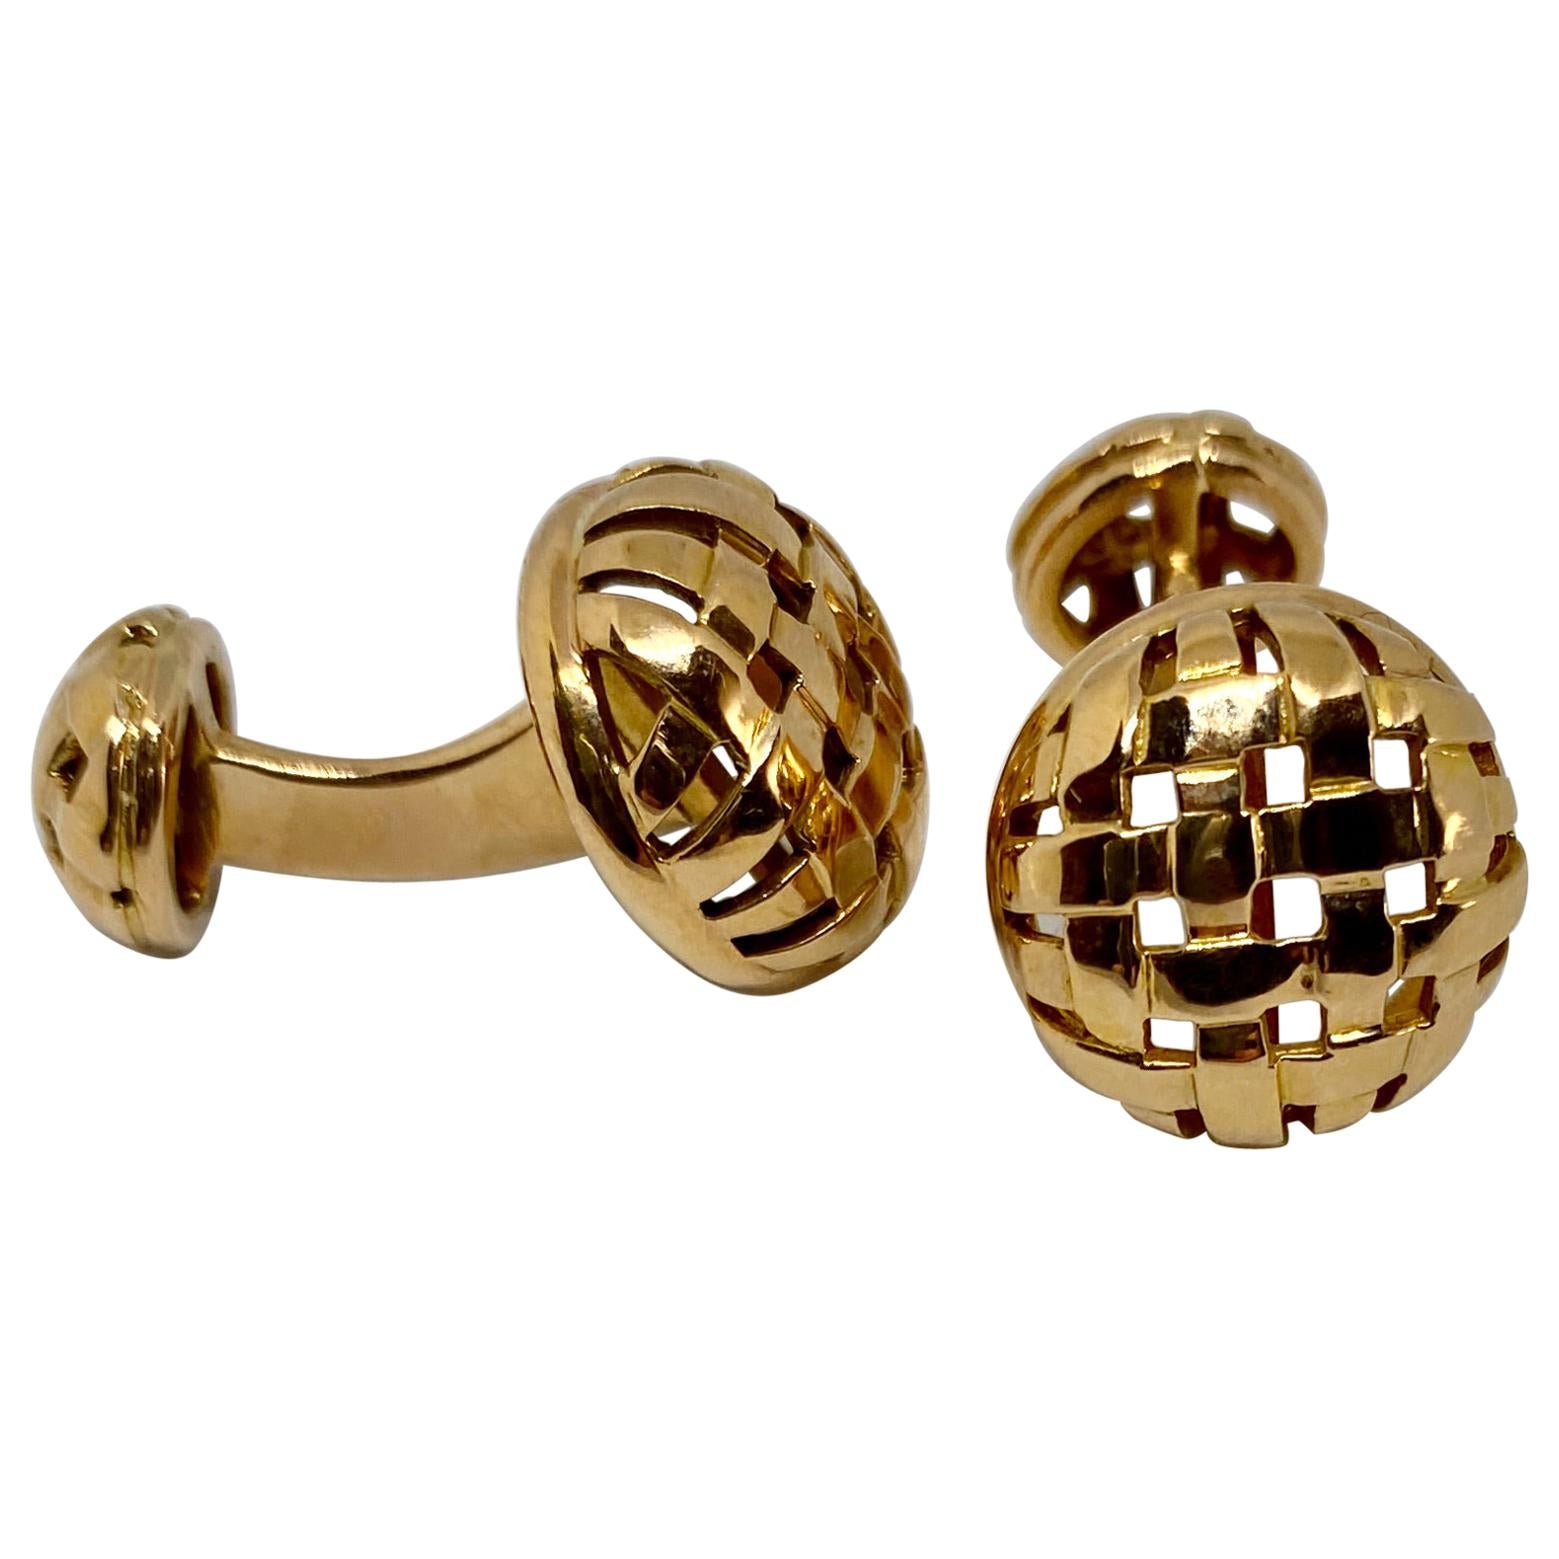 "Vannerie" Basketweave Cufflinks in 18k Yellow Gold Retailed by Bergdorf Goodman For Sale